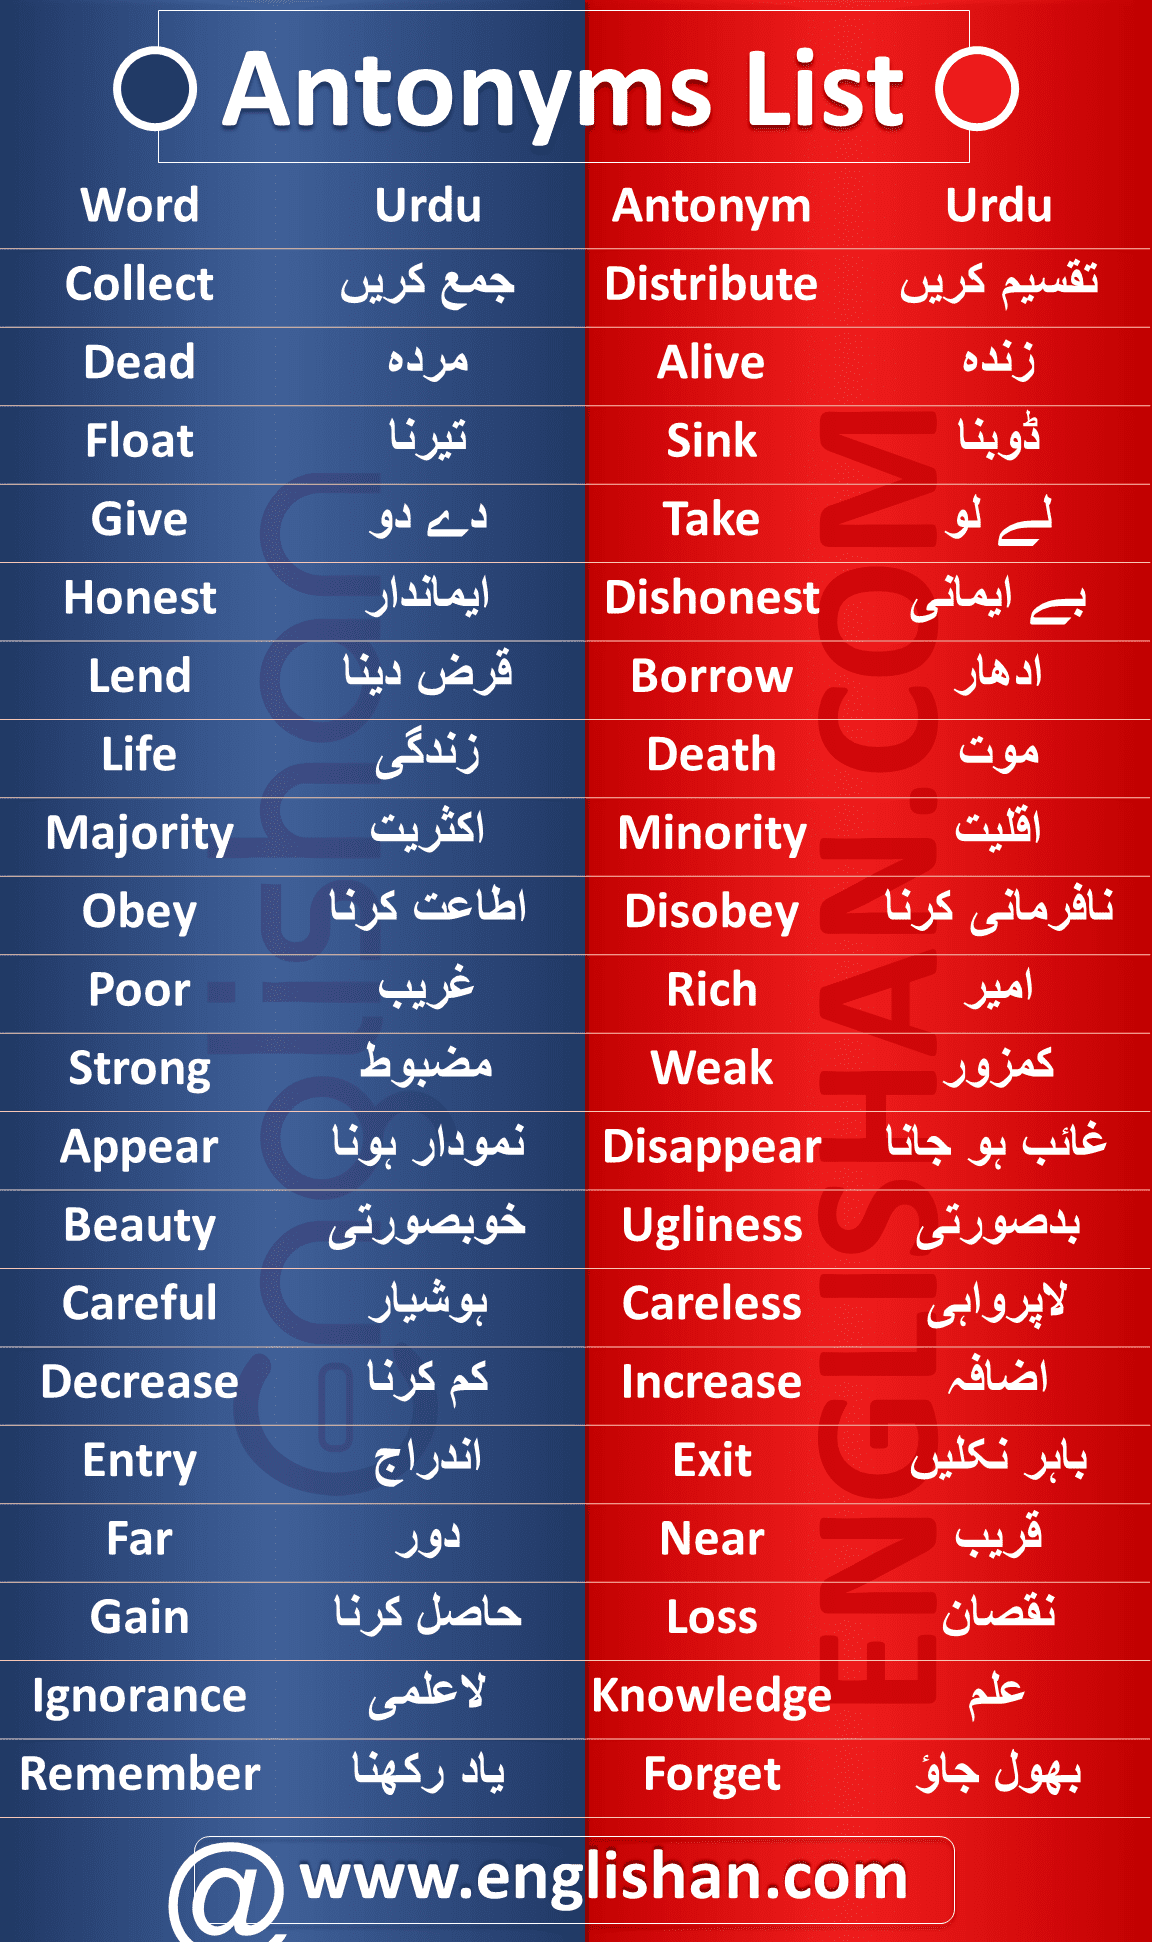 Commonly Antonyms List with Examples Urdu to English